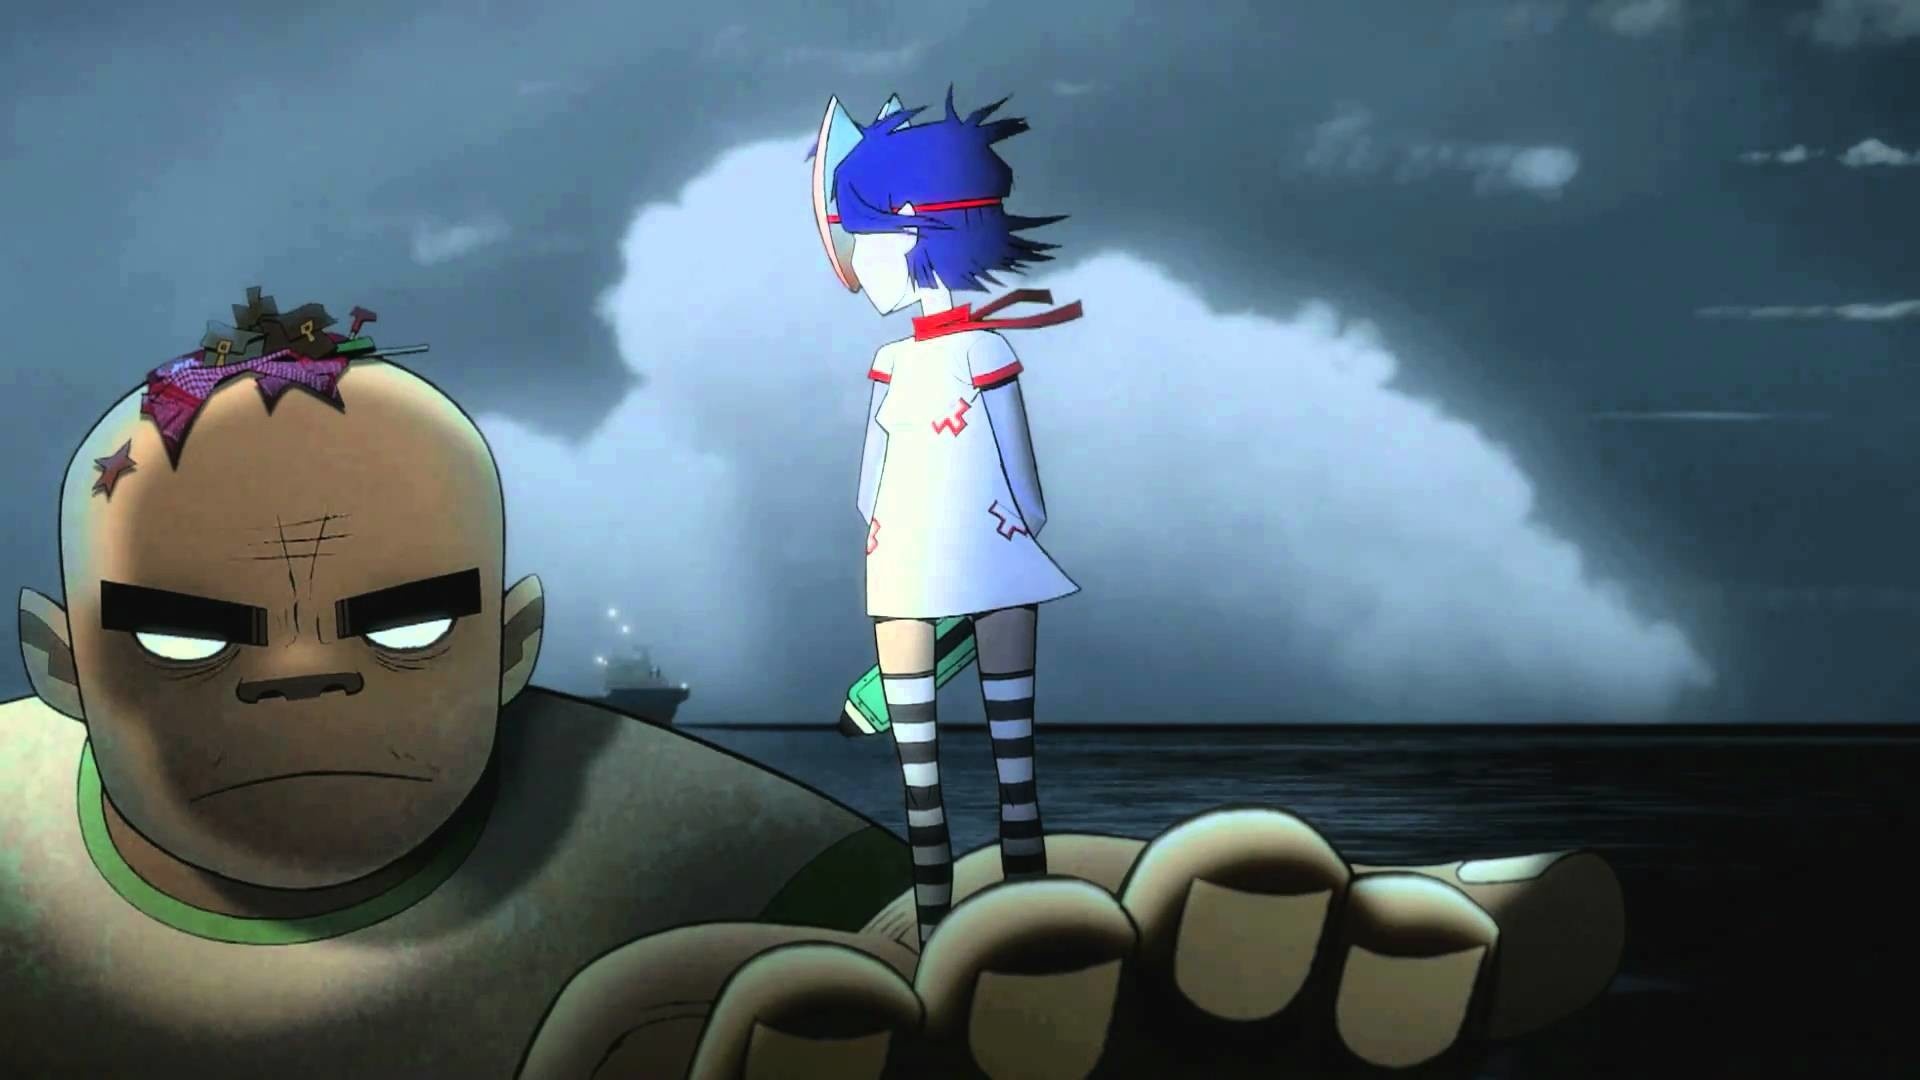 Noodle (Gorillaz): Plastic Beach, Russel, The third album released in 2010, Phase 3 of the band's history. 1920x1080 Full HD Wallpaper.